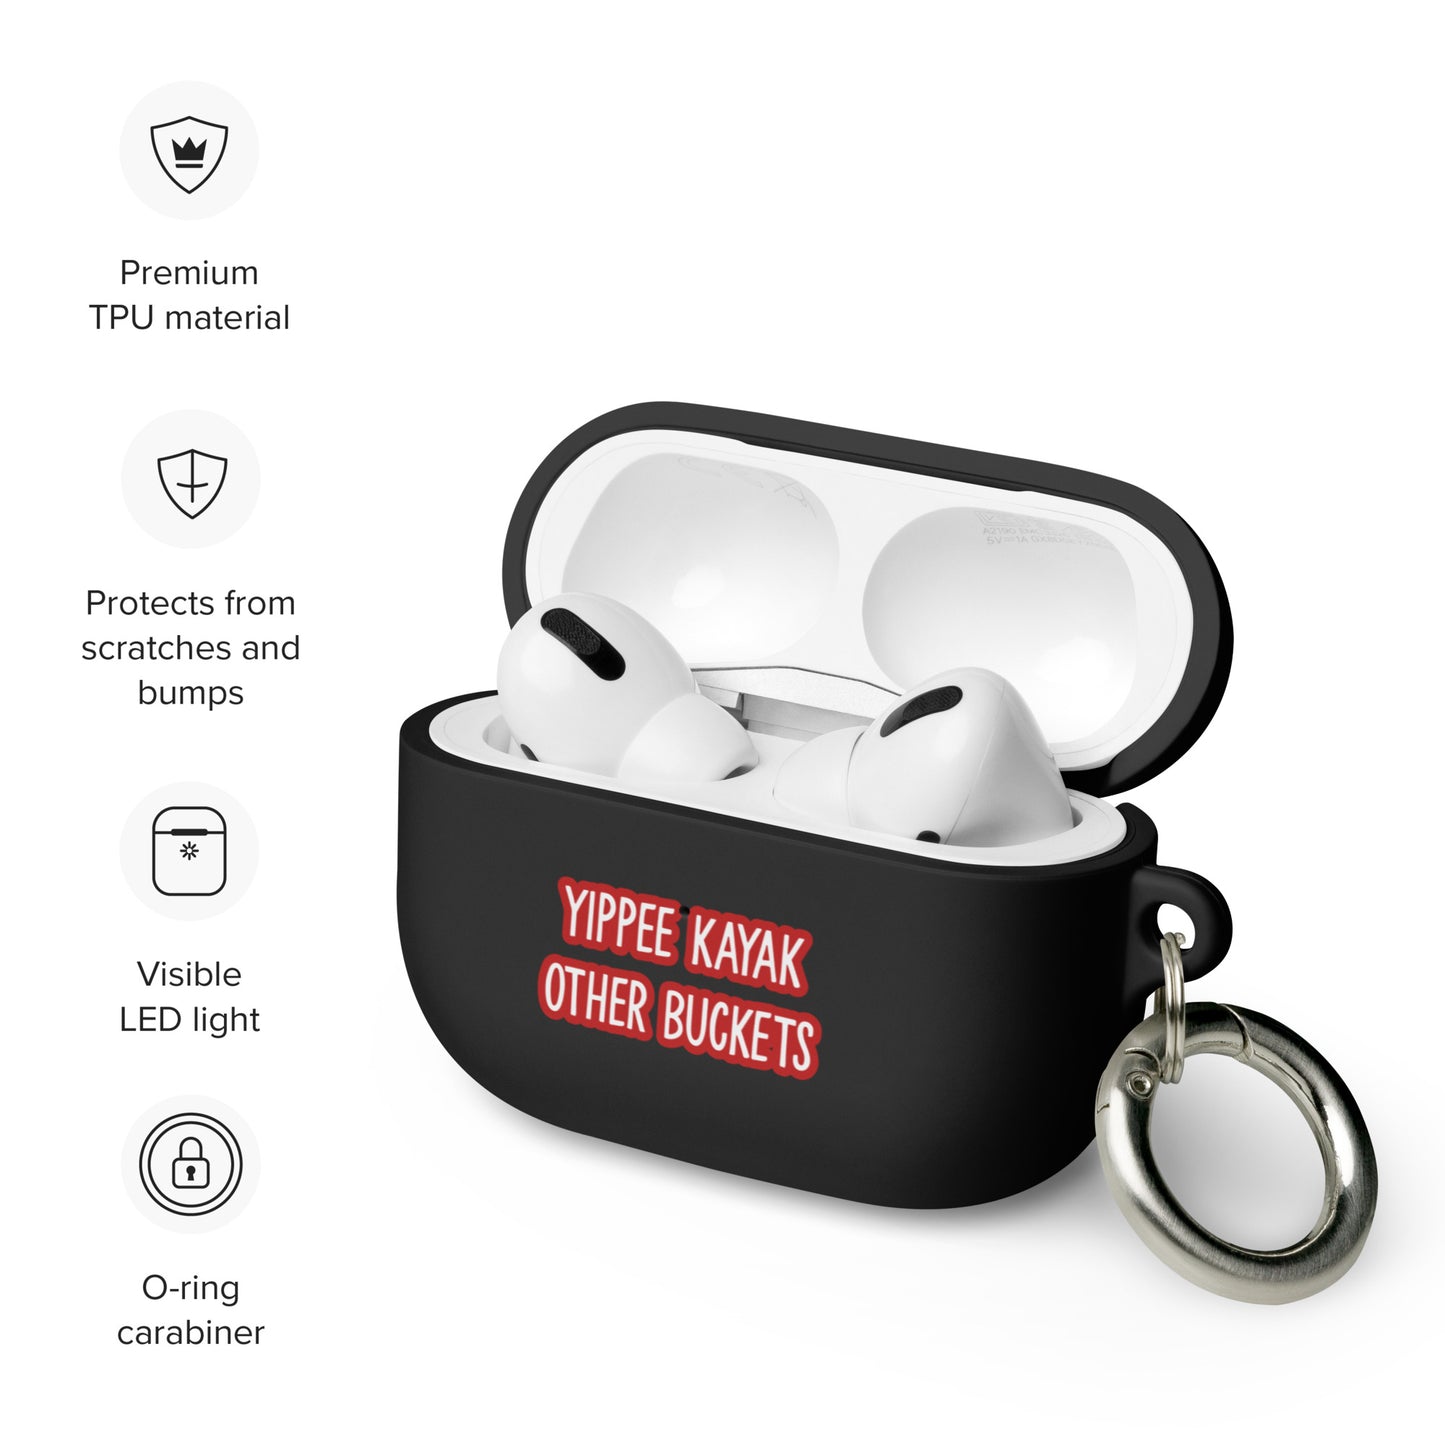 Yippee Kayak Other Buckets Rubber Case for AirPods®